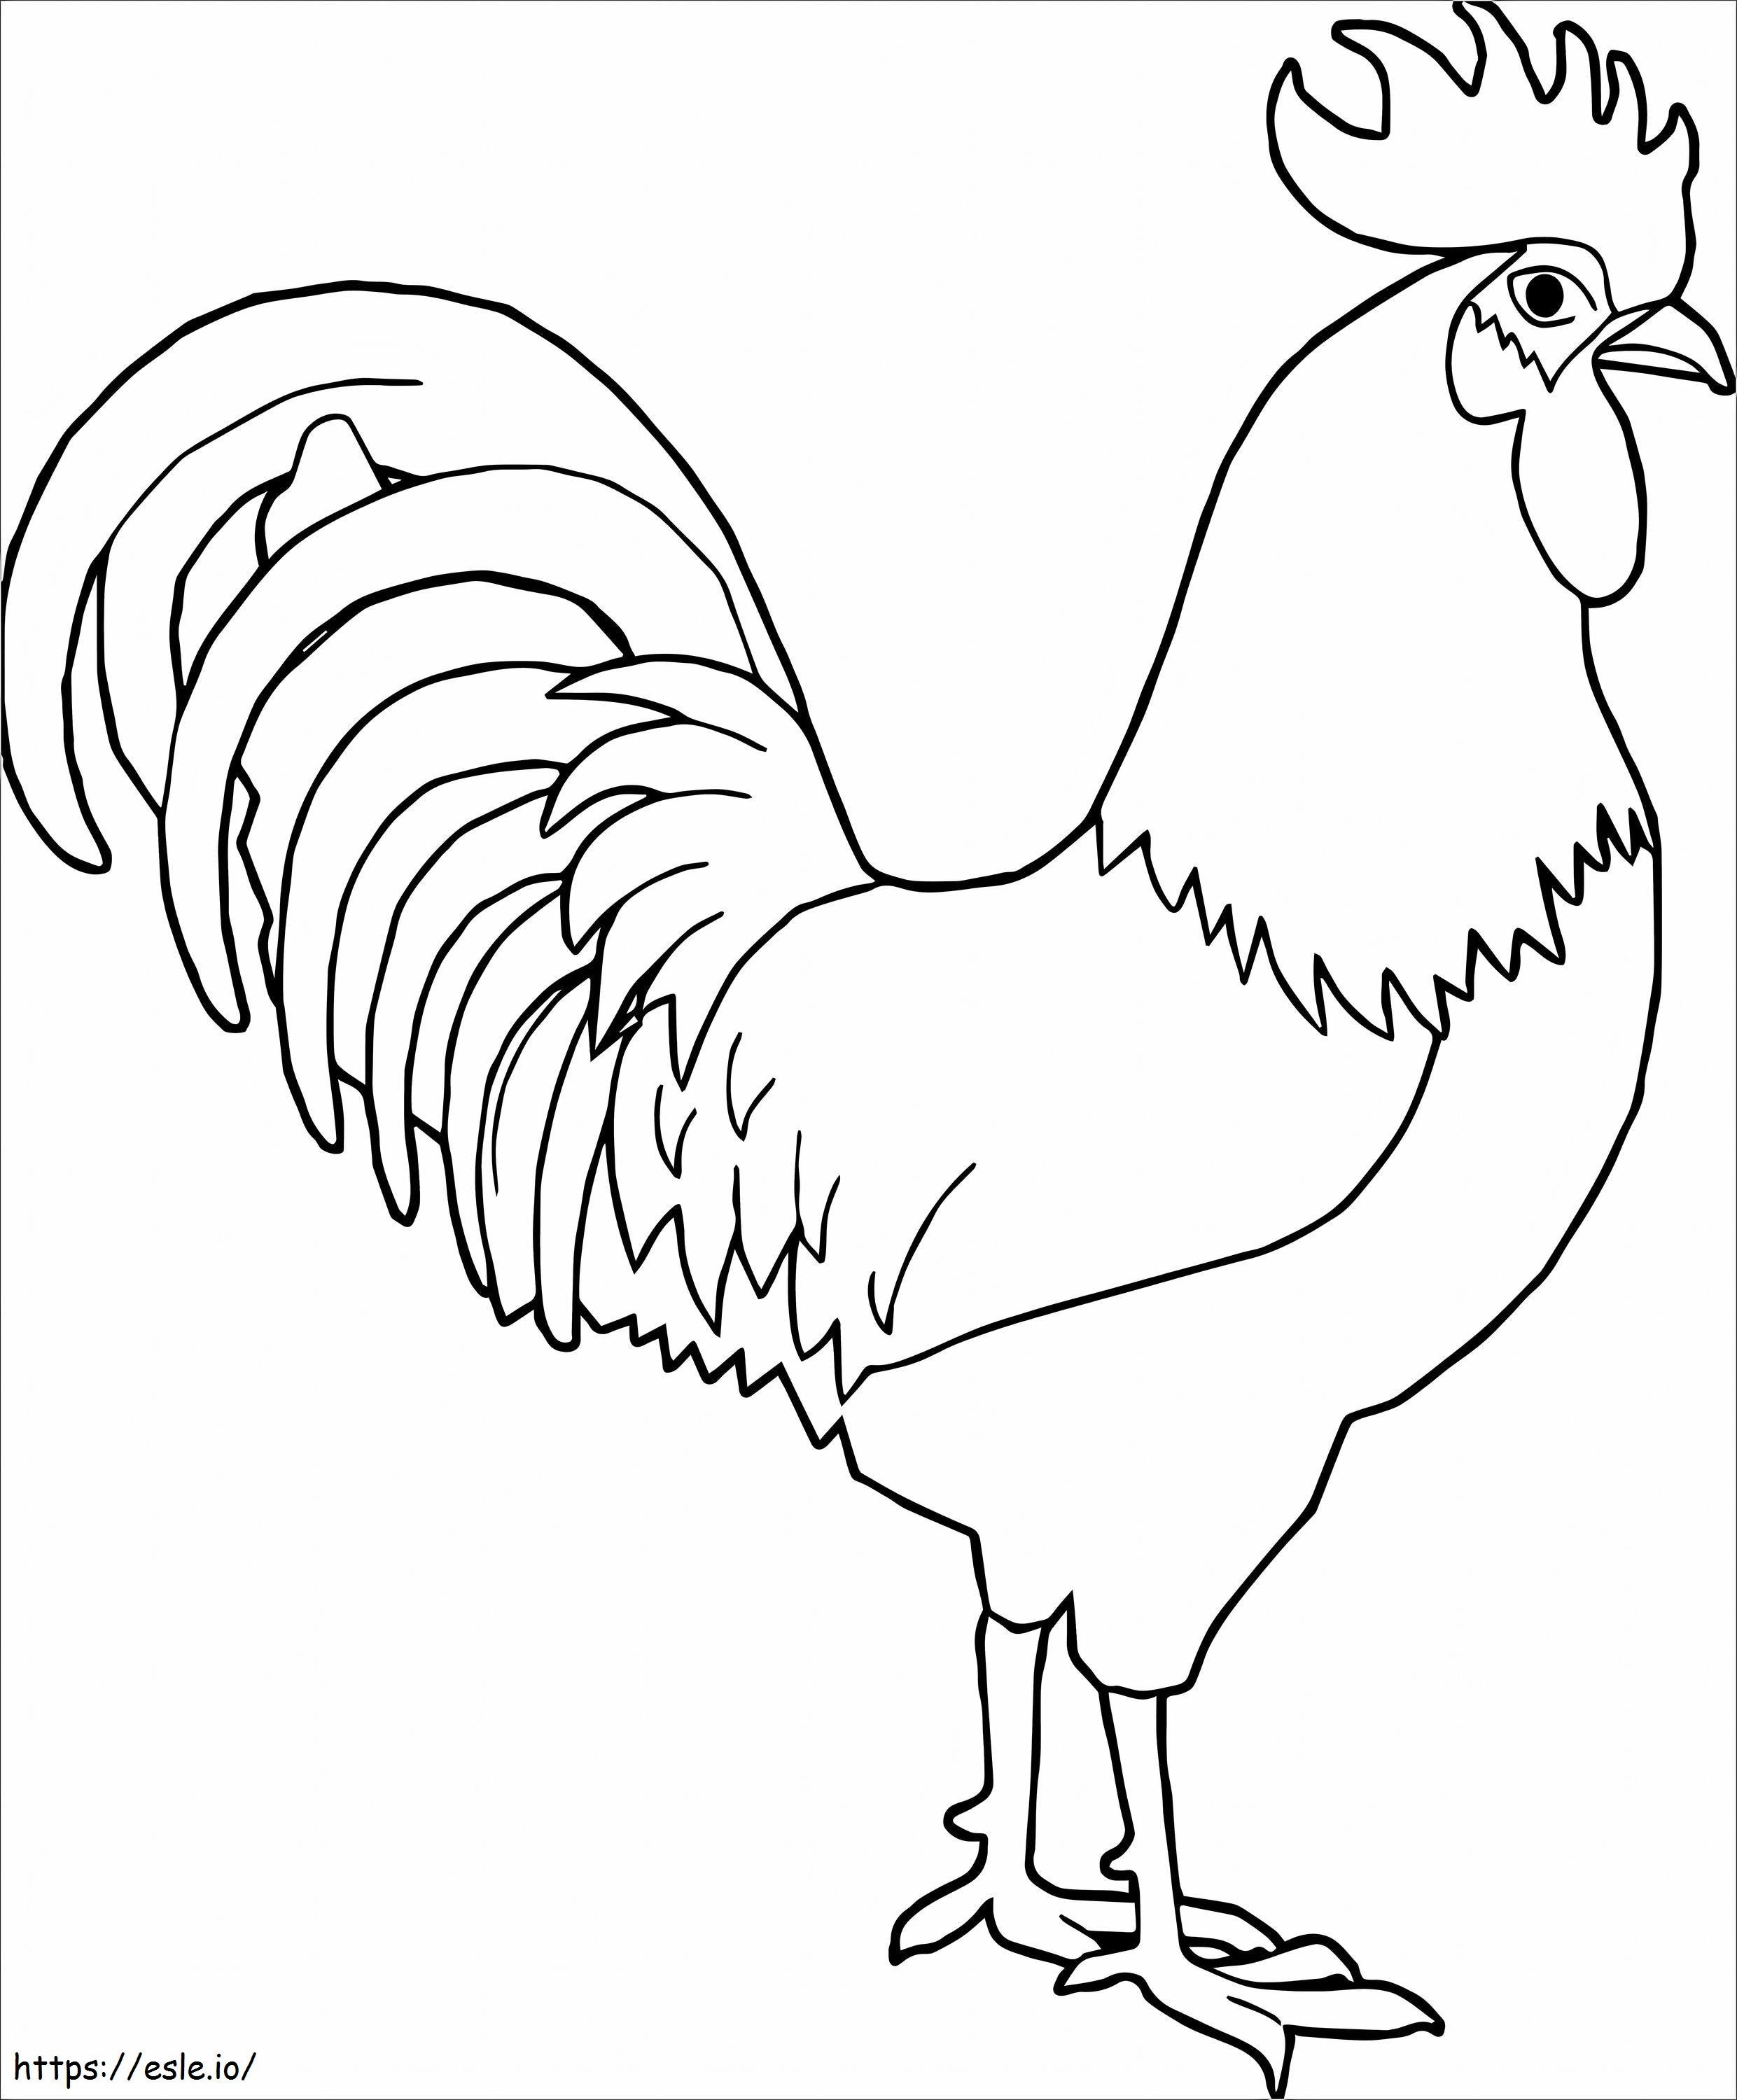 Scaled Basic Rooster coloring page